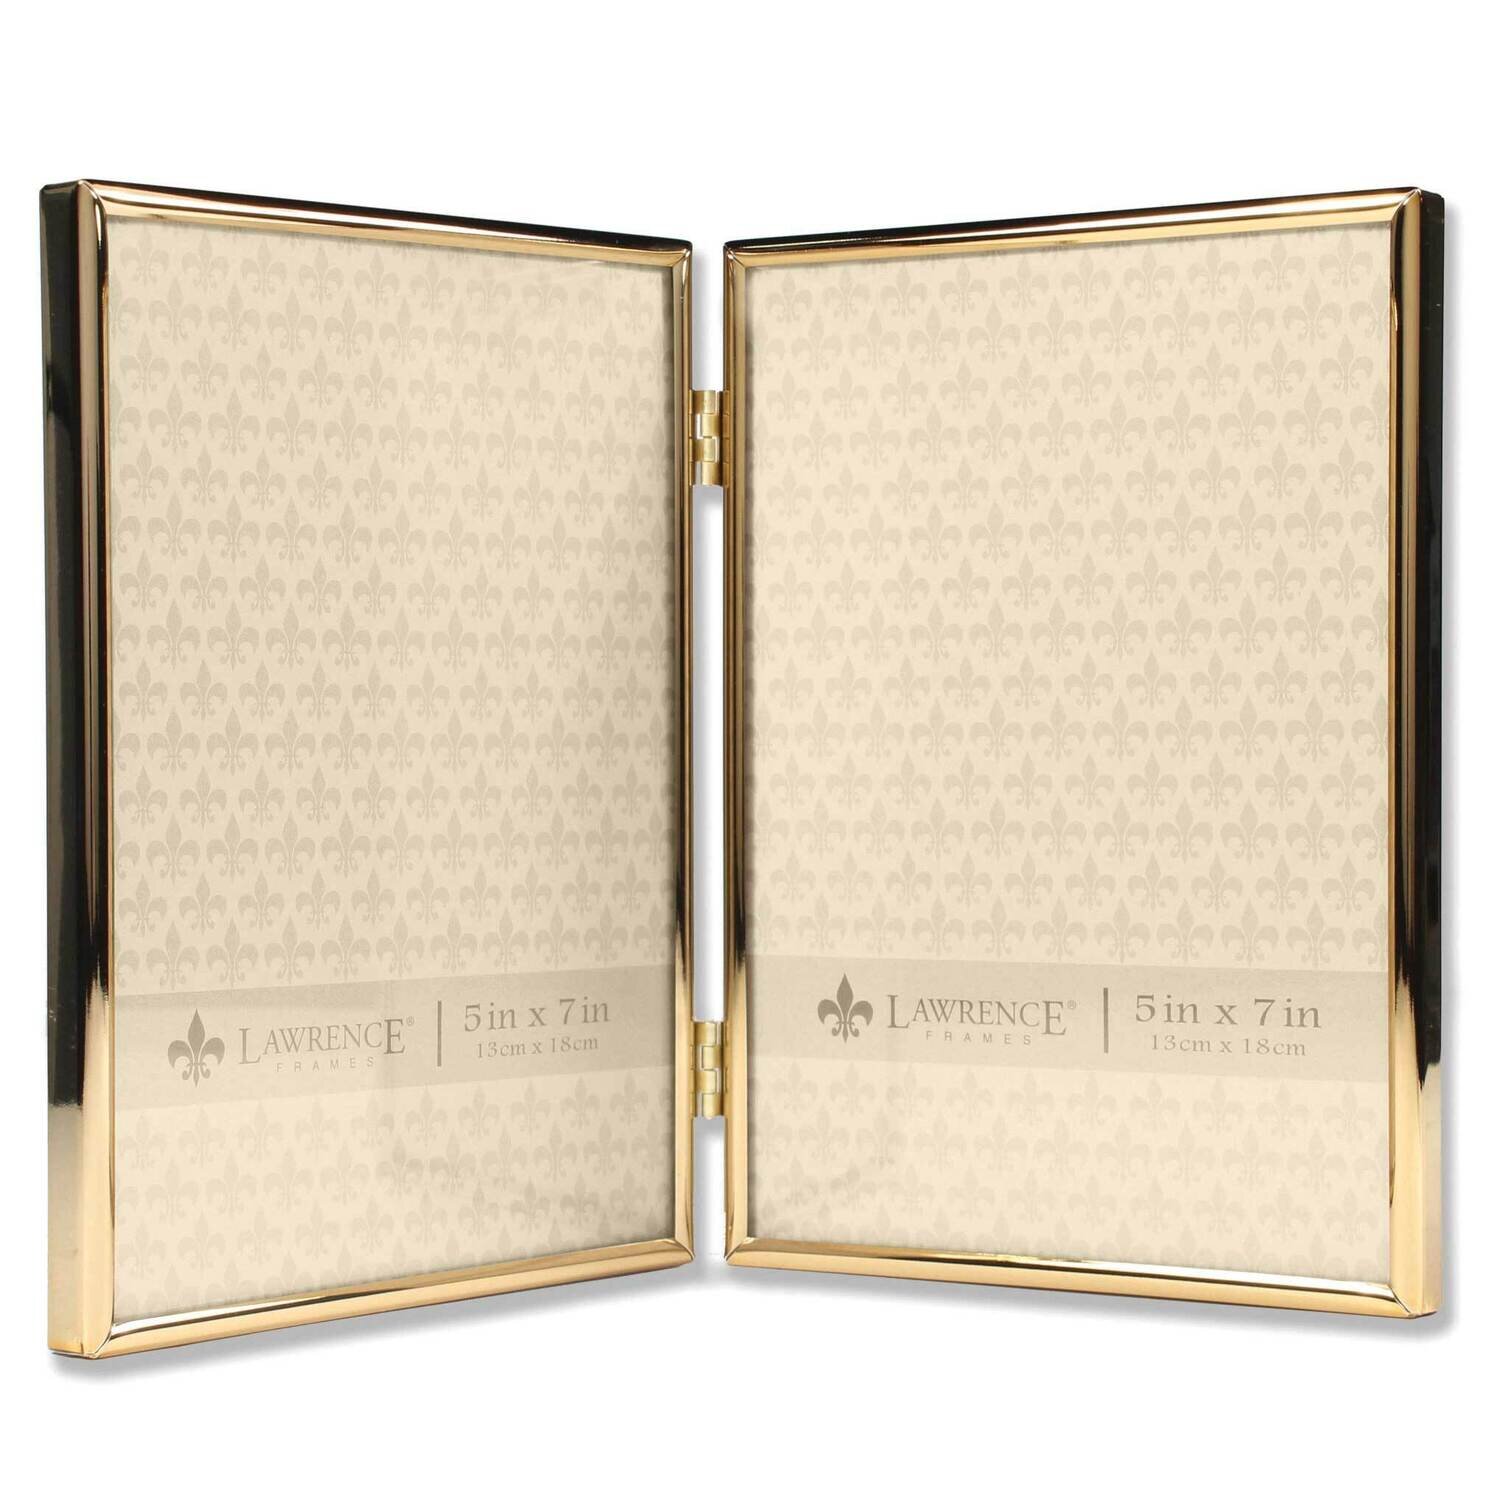 5 x 7 Inch Hinged Double Simply Gold-tone Metal Picture Frame GM22272